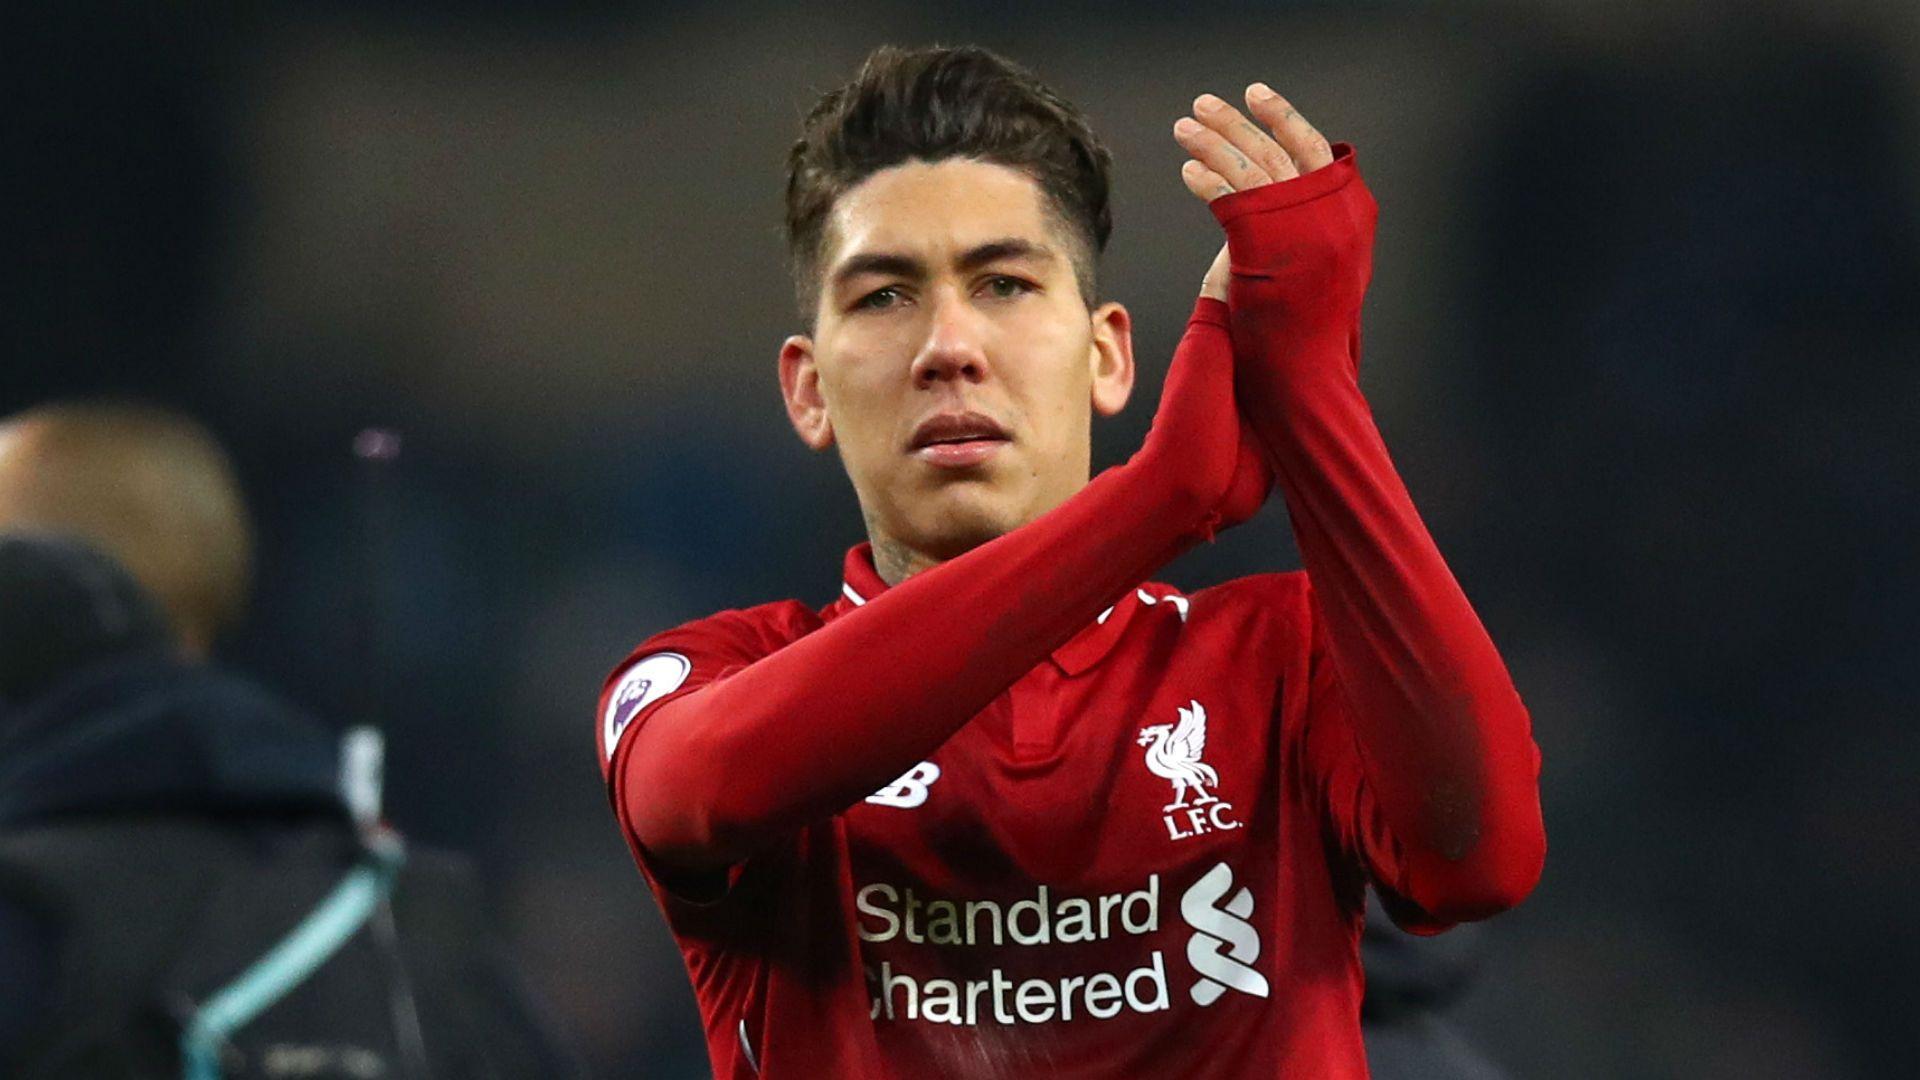 Liverpool have to bounce back, says Firmino